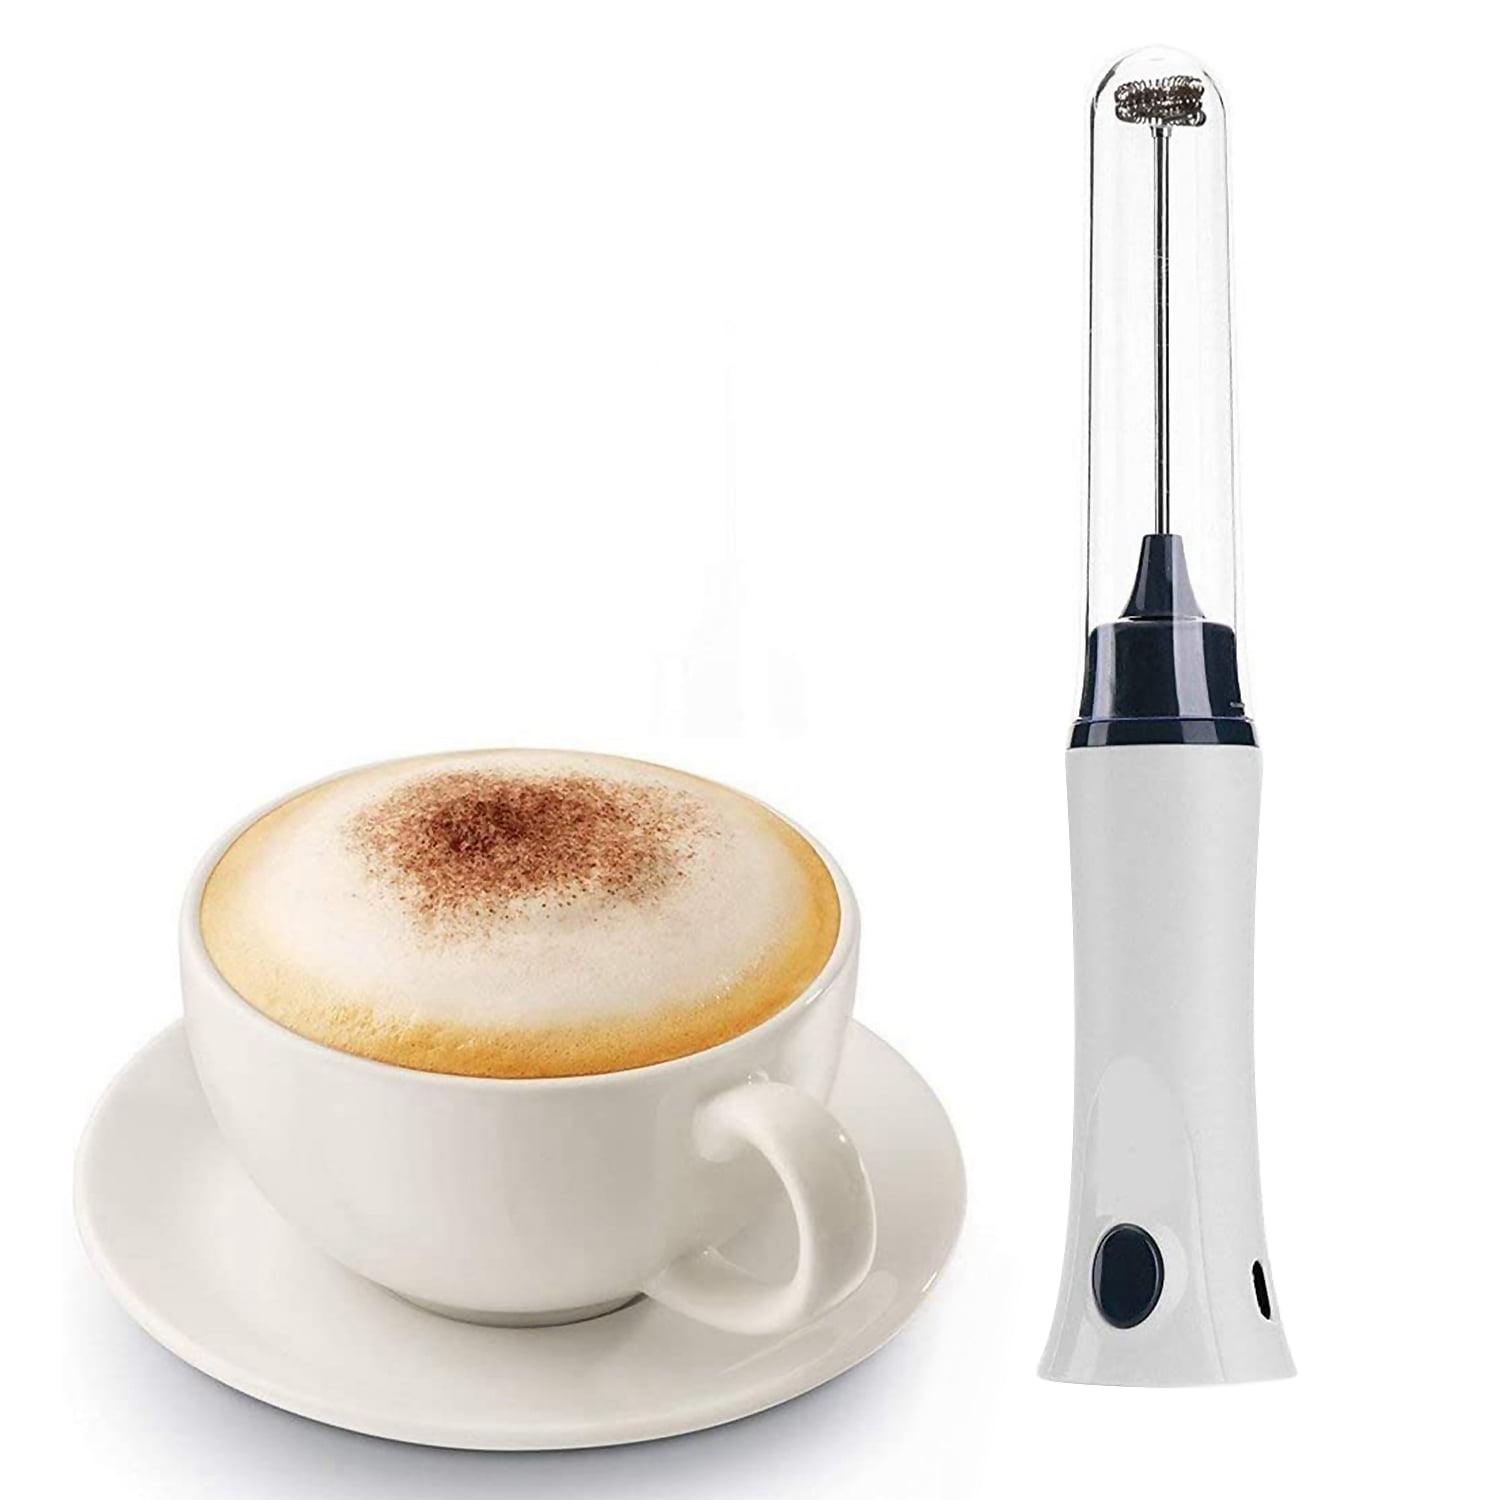 Opcus Electric Milk Frother Handheld for Coffee Portable Rechargeable Drink Mixer Whisk Coffee Foam Maker for Latte Black, Size: One Size